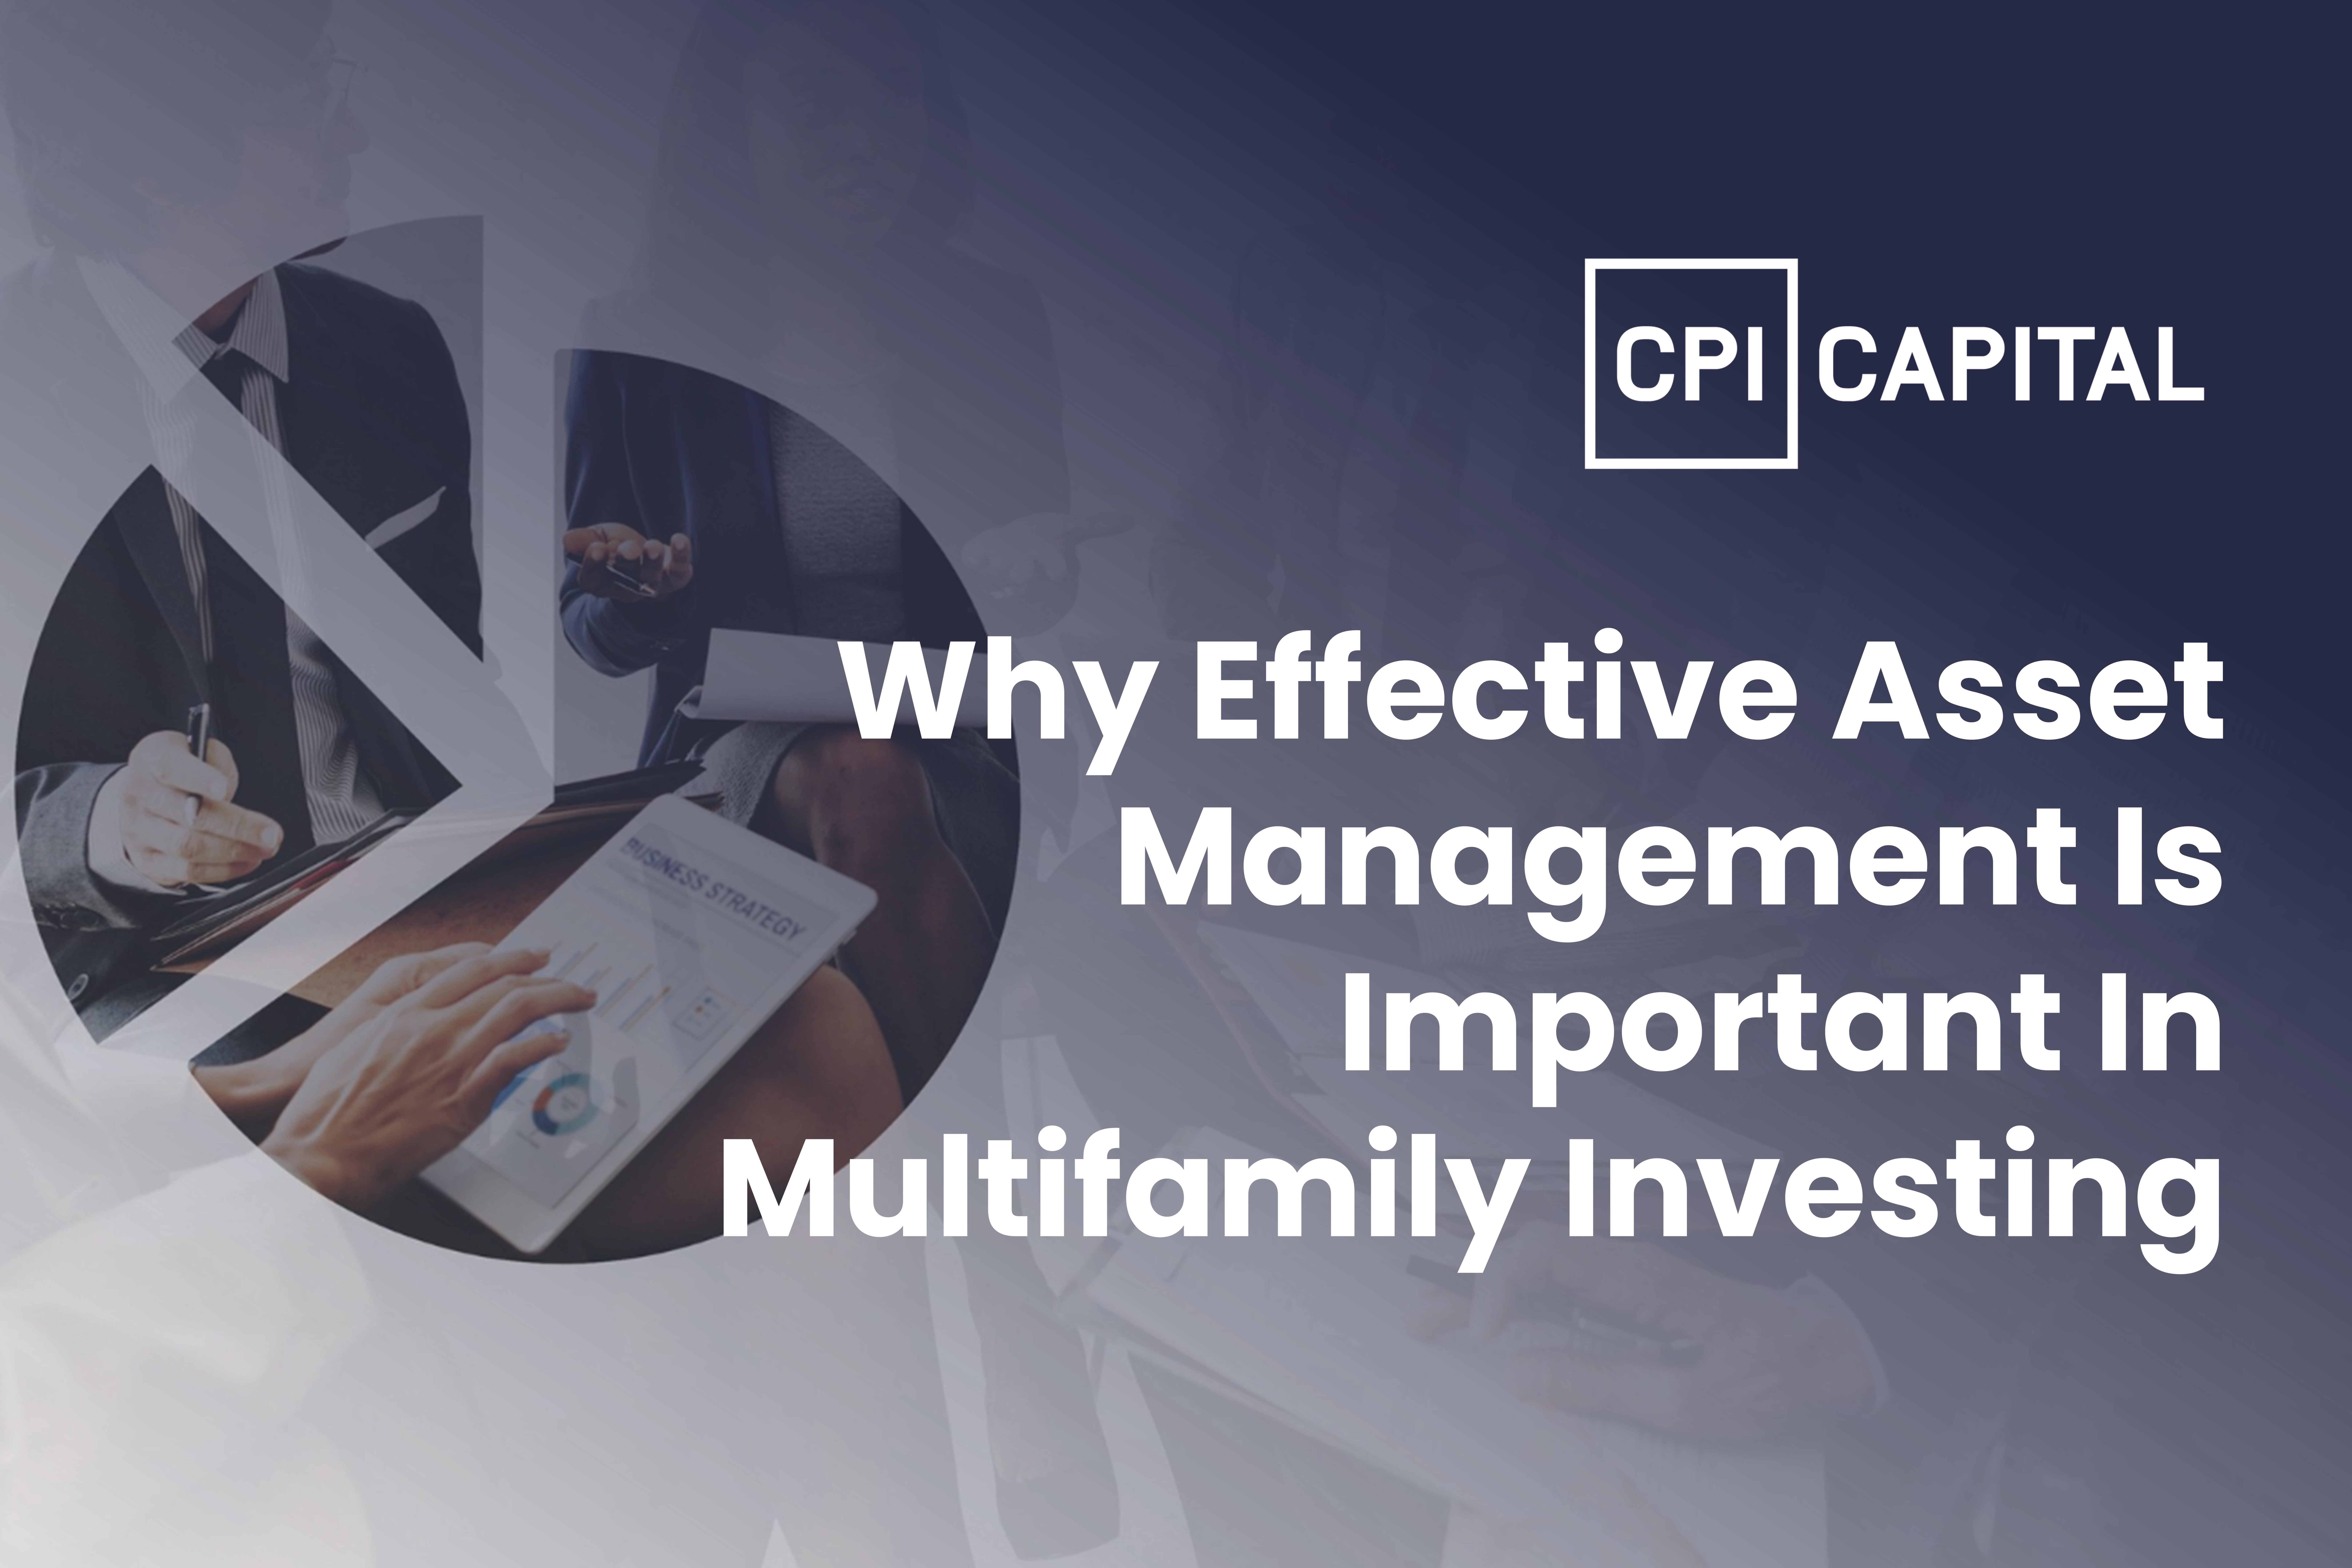 Why Effective Asset Management Is Important In Multifamily Investing